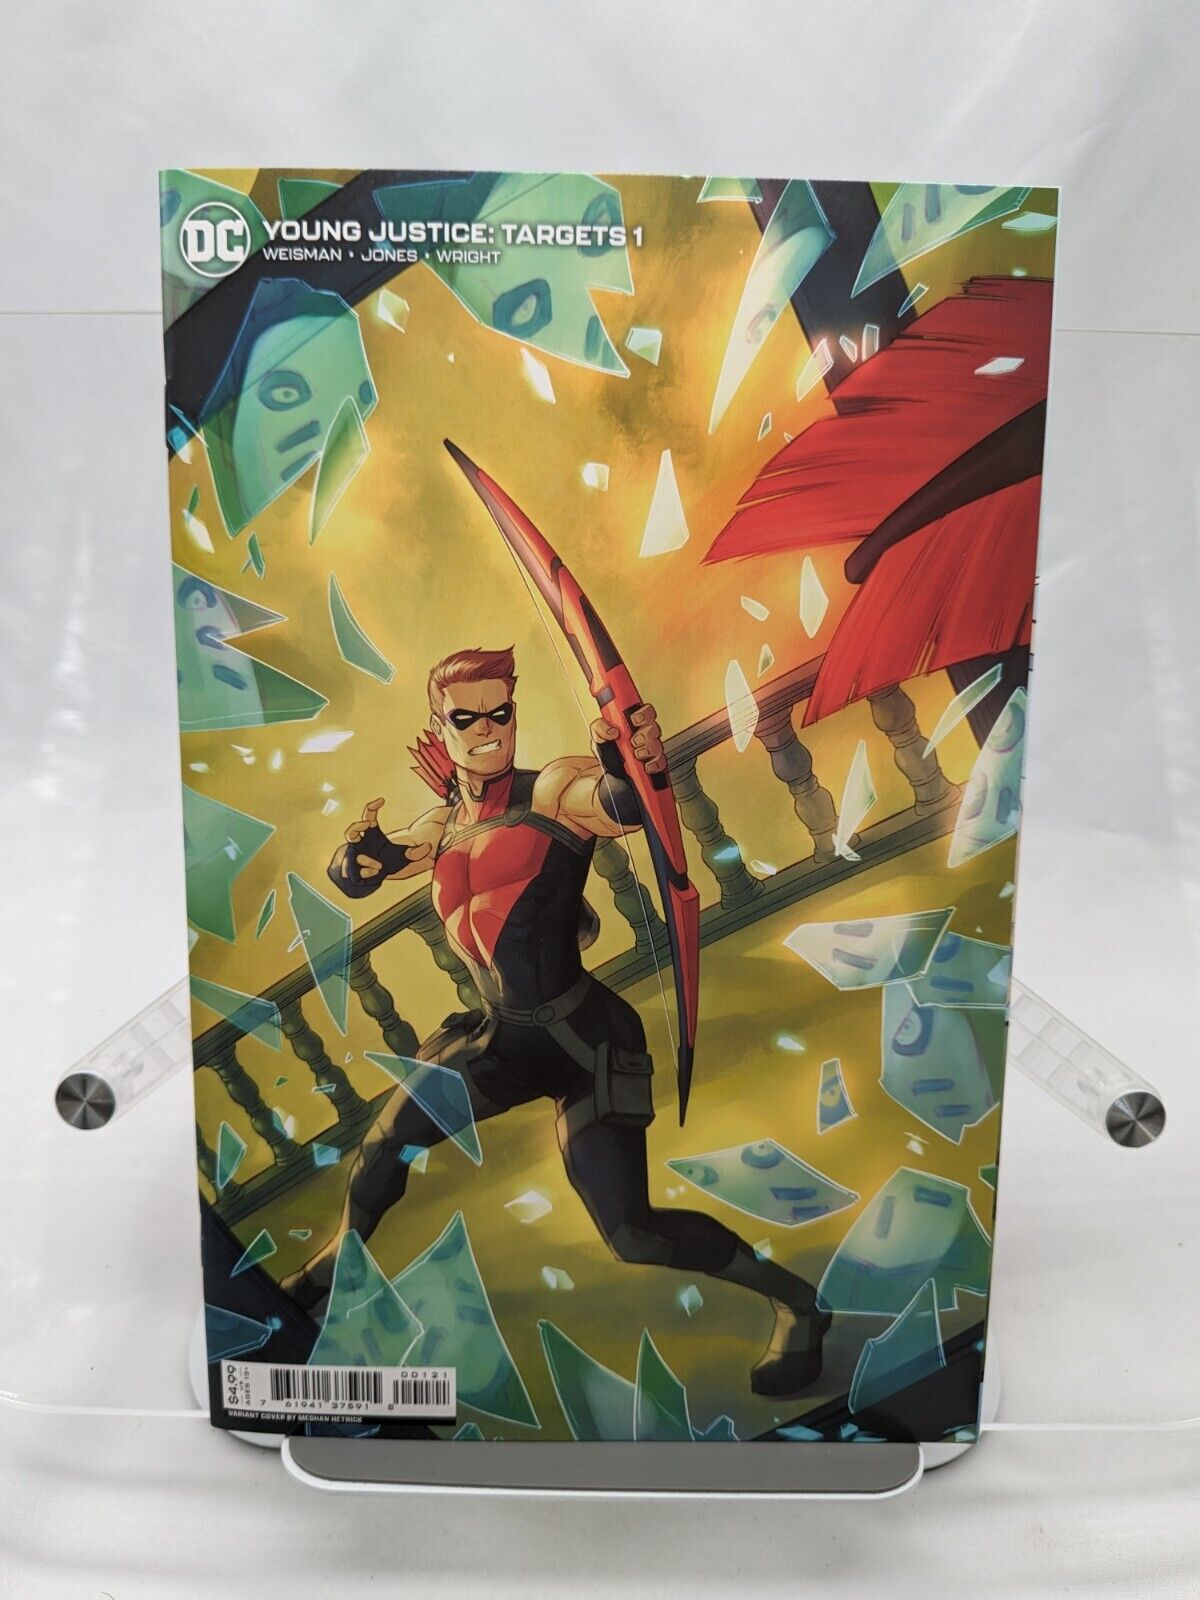 Young Justice Targets #1 Variant Cover, DC Comics